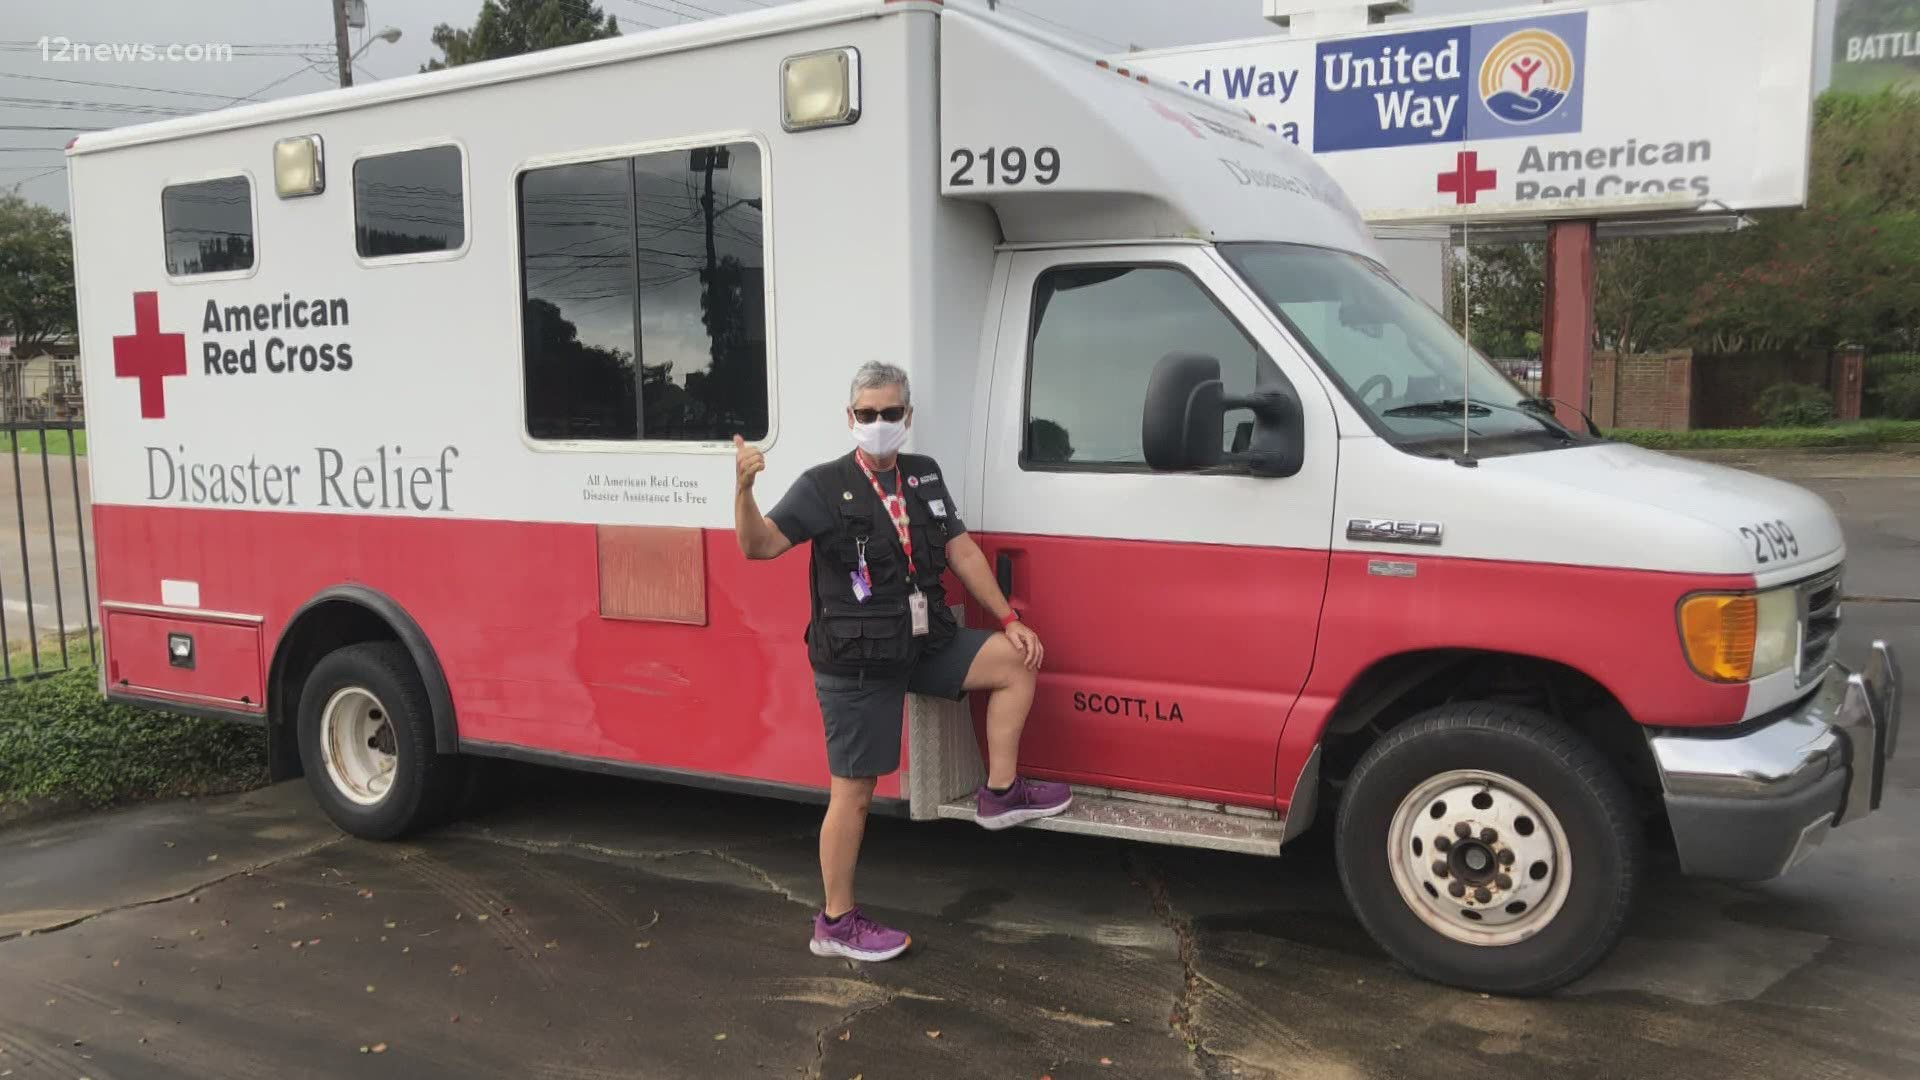 During a natural disaster, you can count on American Red Cross volunteers to offer aid. The Red Cross needs your help as a volunteer to meet the demand.